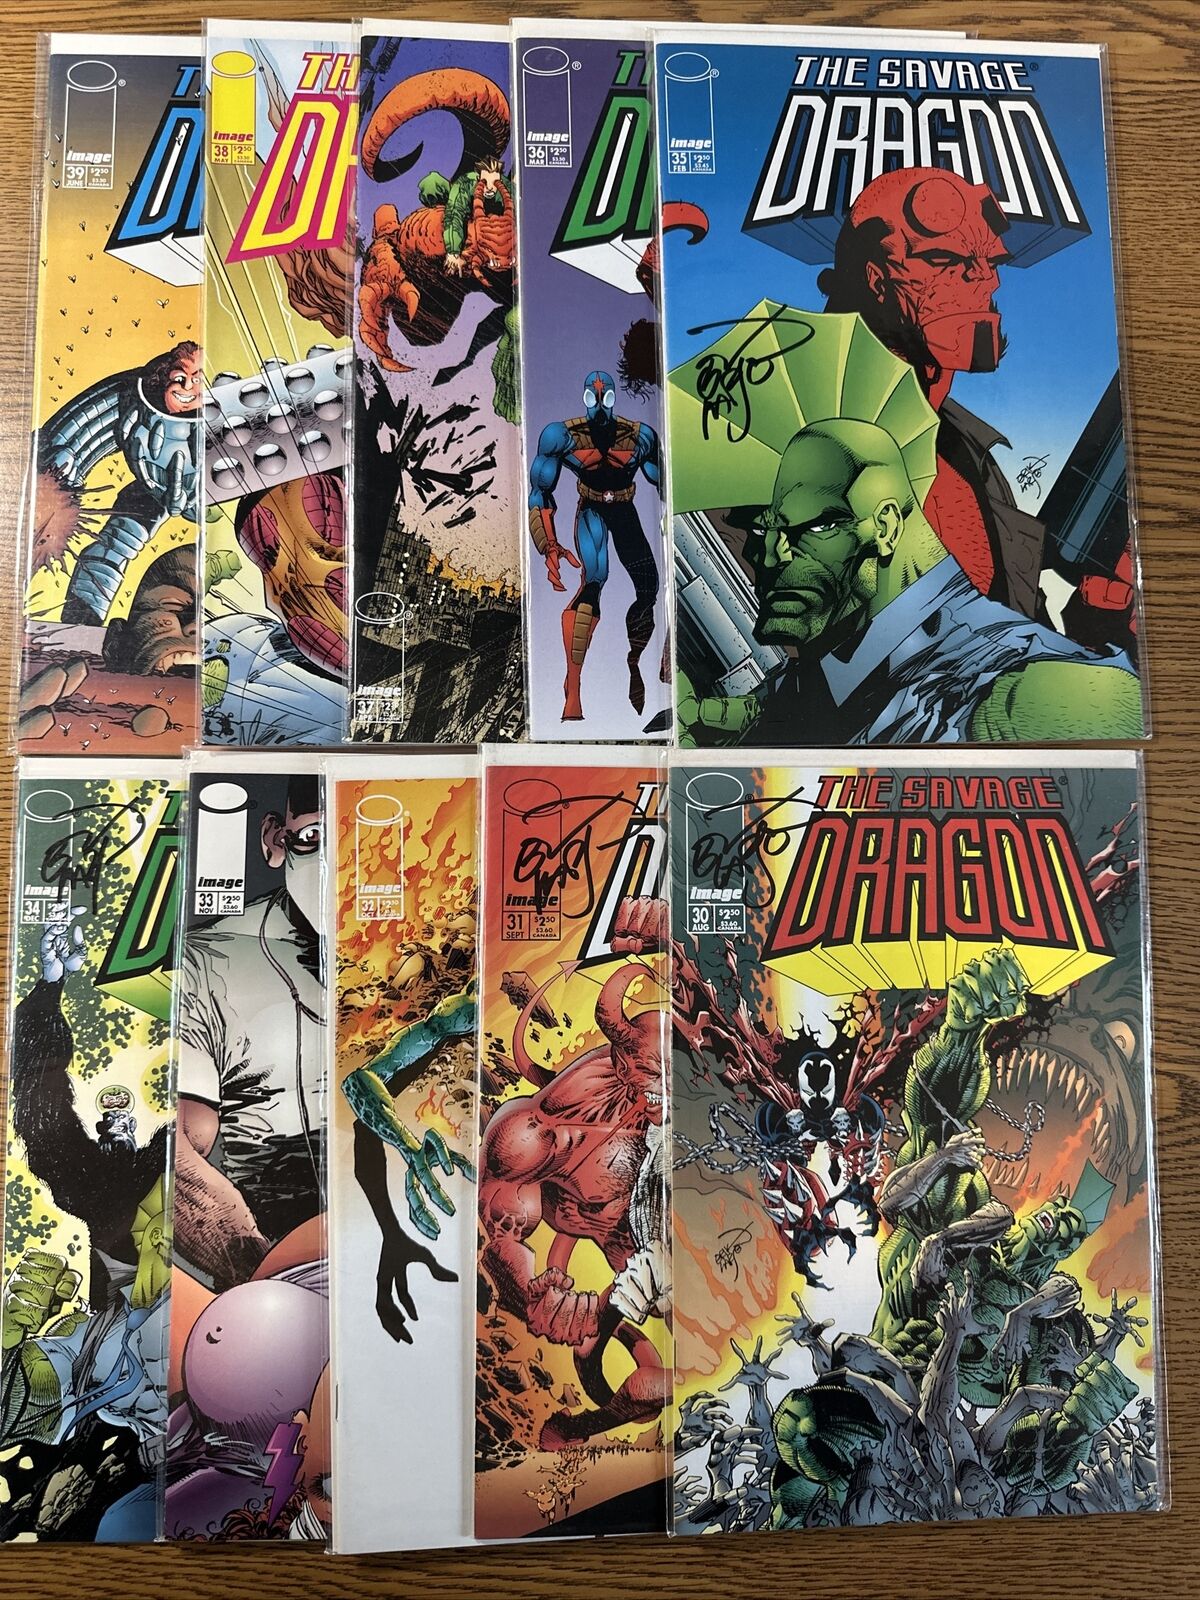 The Savage Dragon #30 31 32 33 34 35 36 47 38 39 Lot Image 5x Signed By Larson